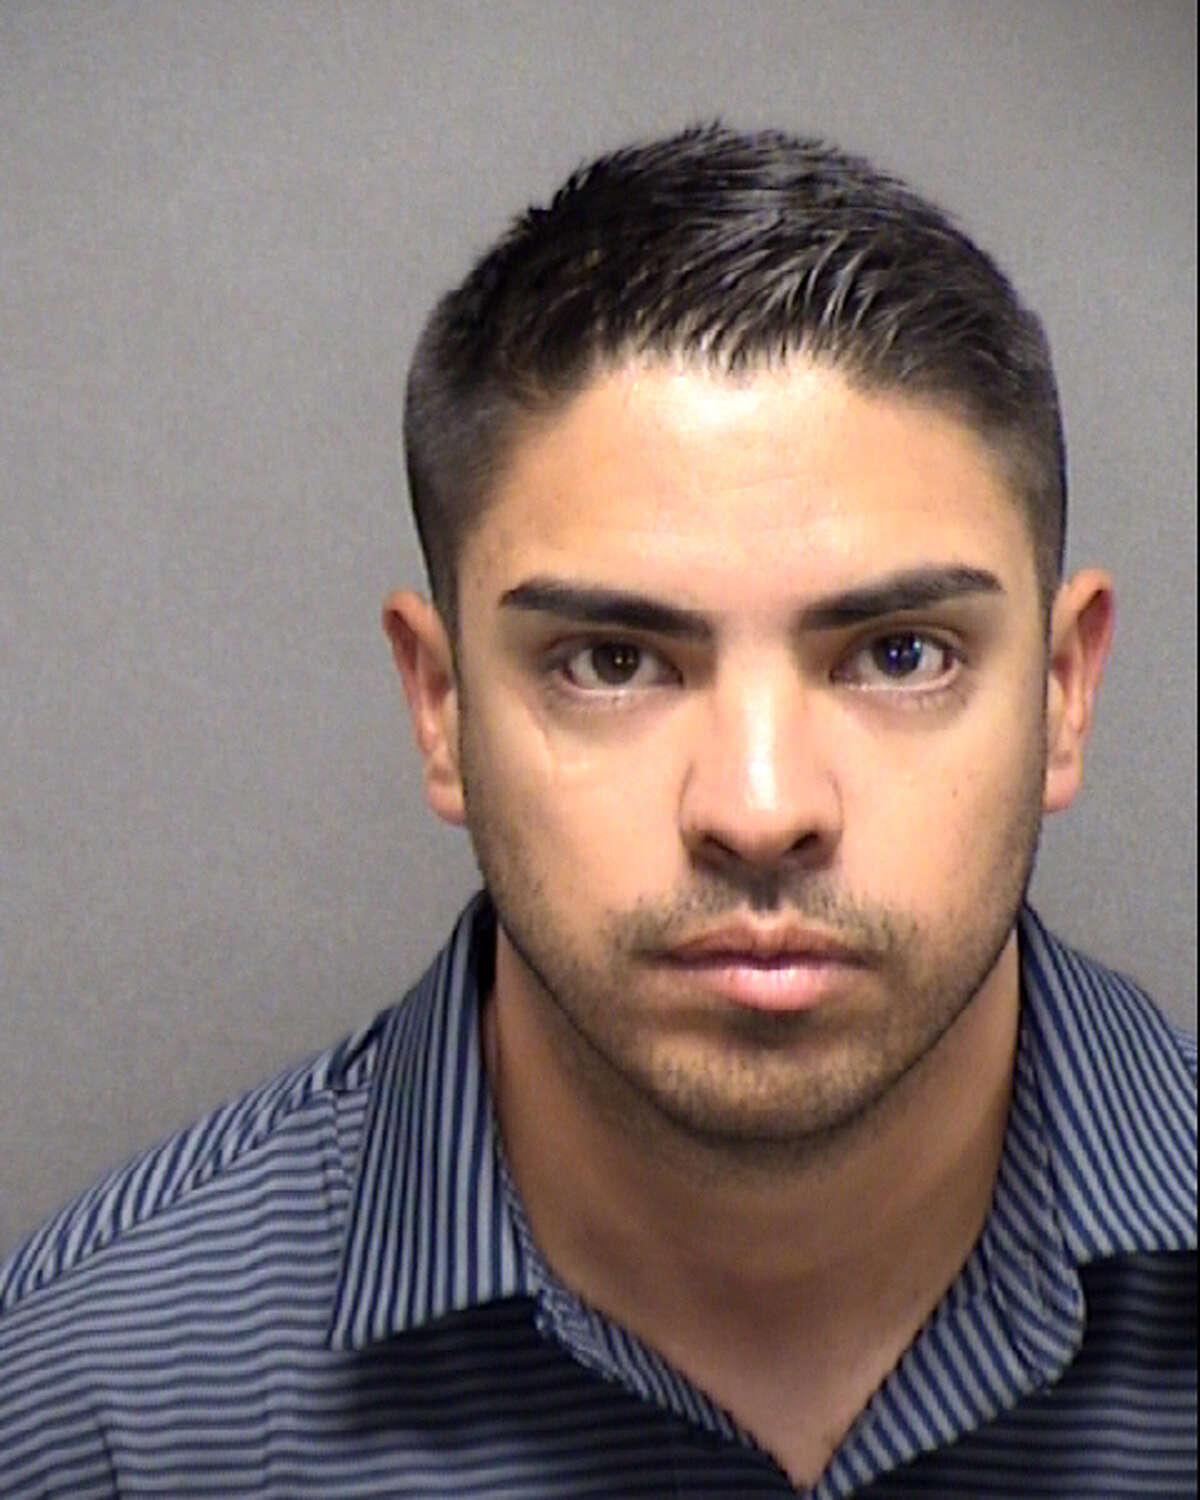 Reynaldo Chavera, 31, has been charged with possession of less than one gram of a controlled substance, Bexar County booking records show.